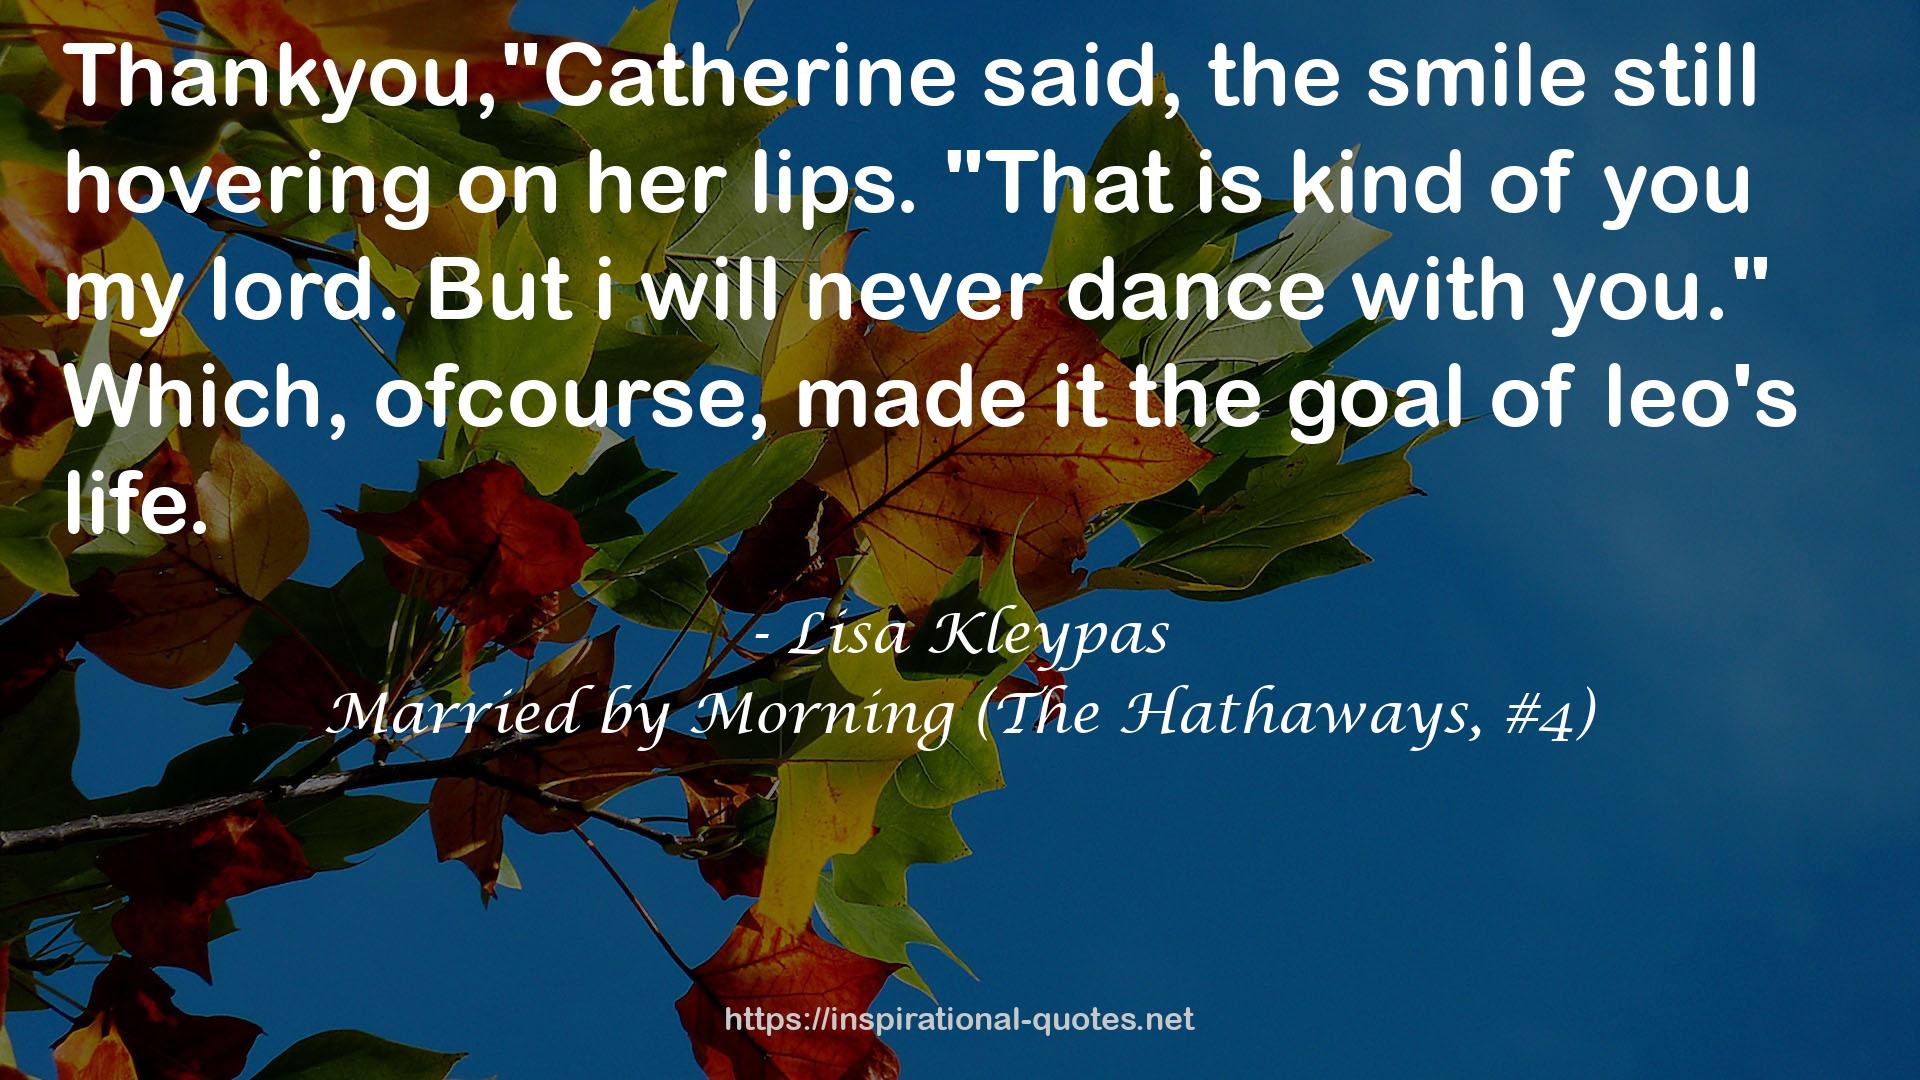 Married by Morning (The Hathaways, #4) QUOTES